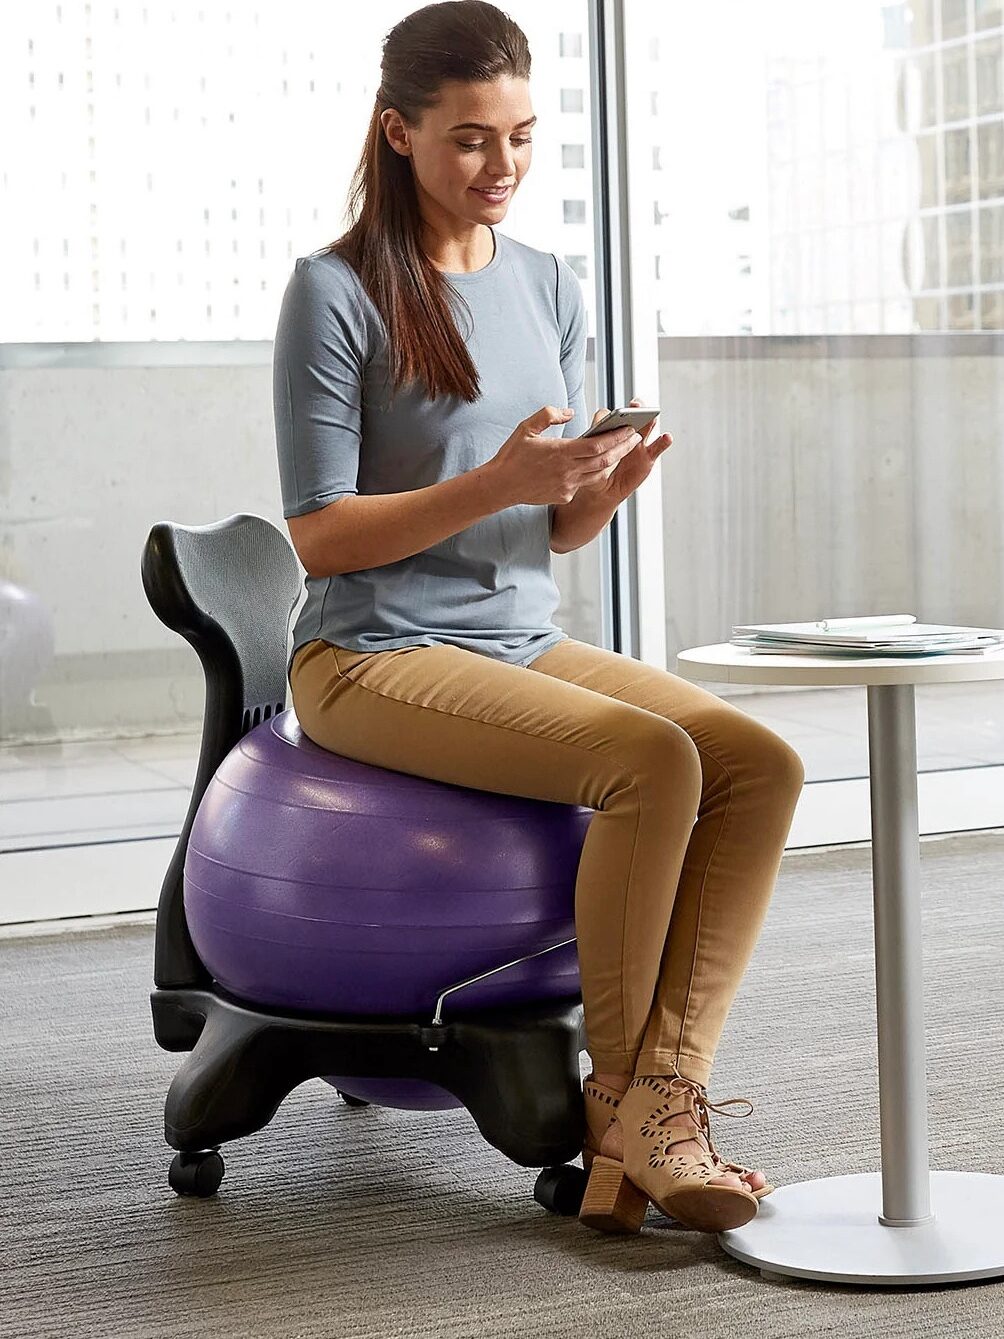 A woman sitting on a purple exercise ball chair, using a smartphone, in a modern office with large windows.